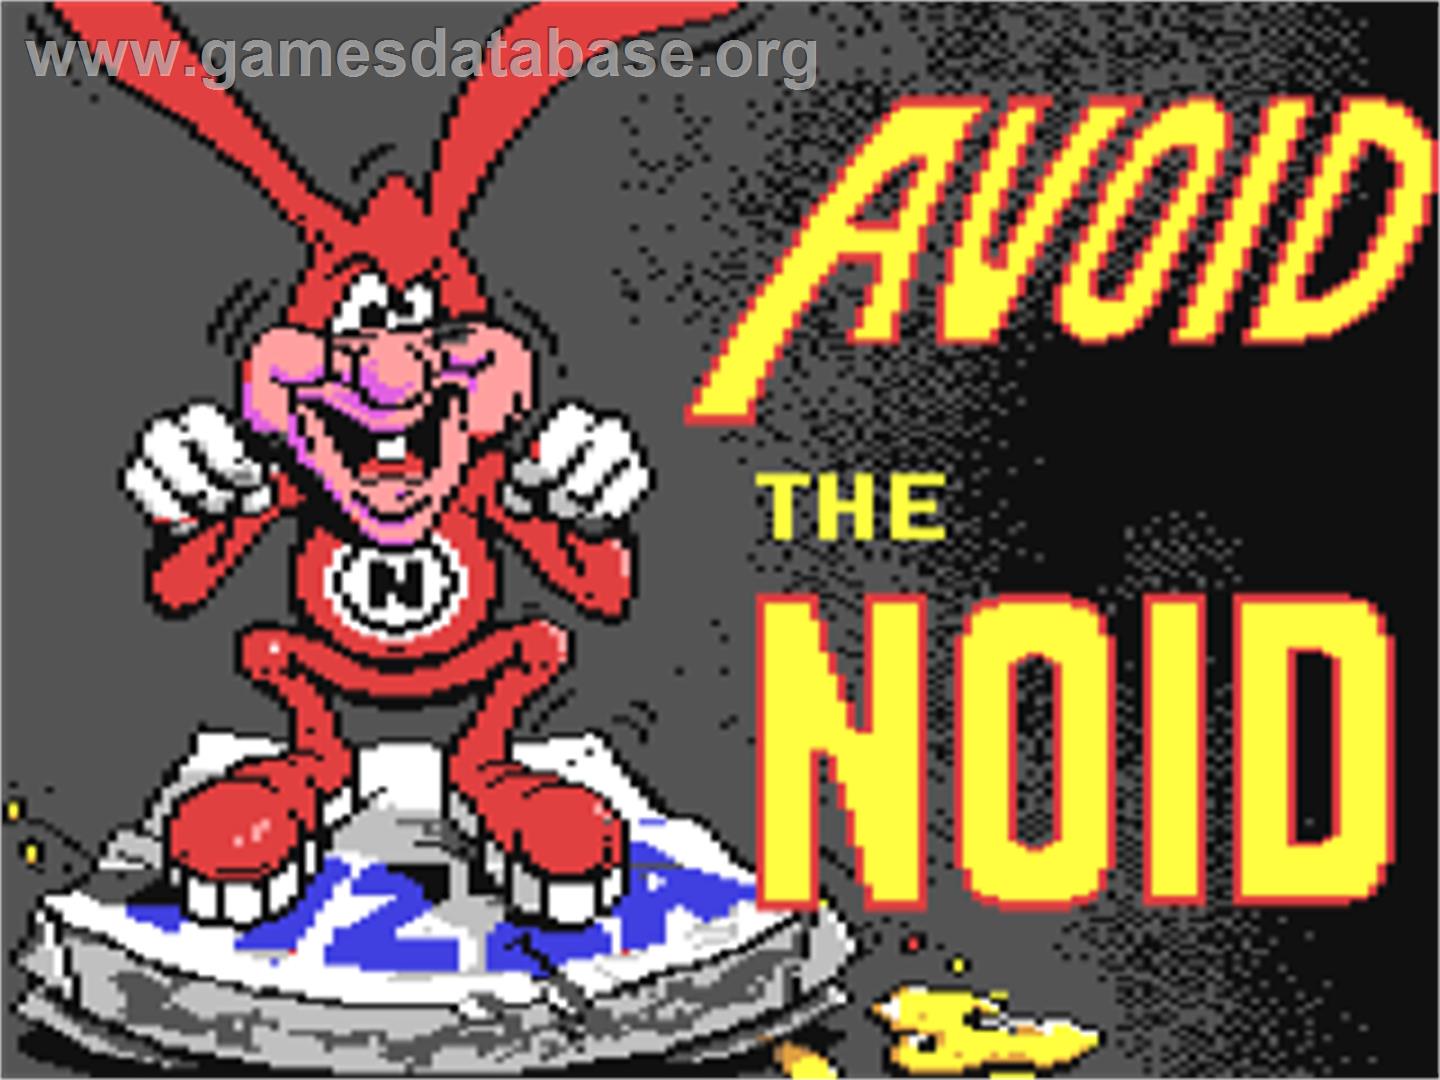 Avoid the Noid - Commodore 64 - Artwork - Title Screen